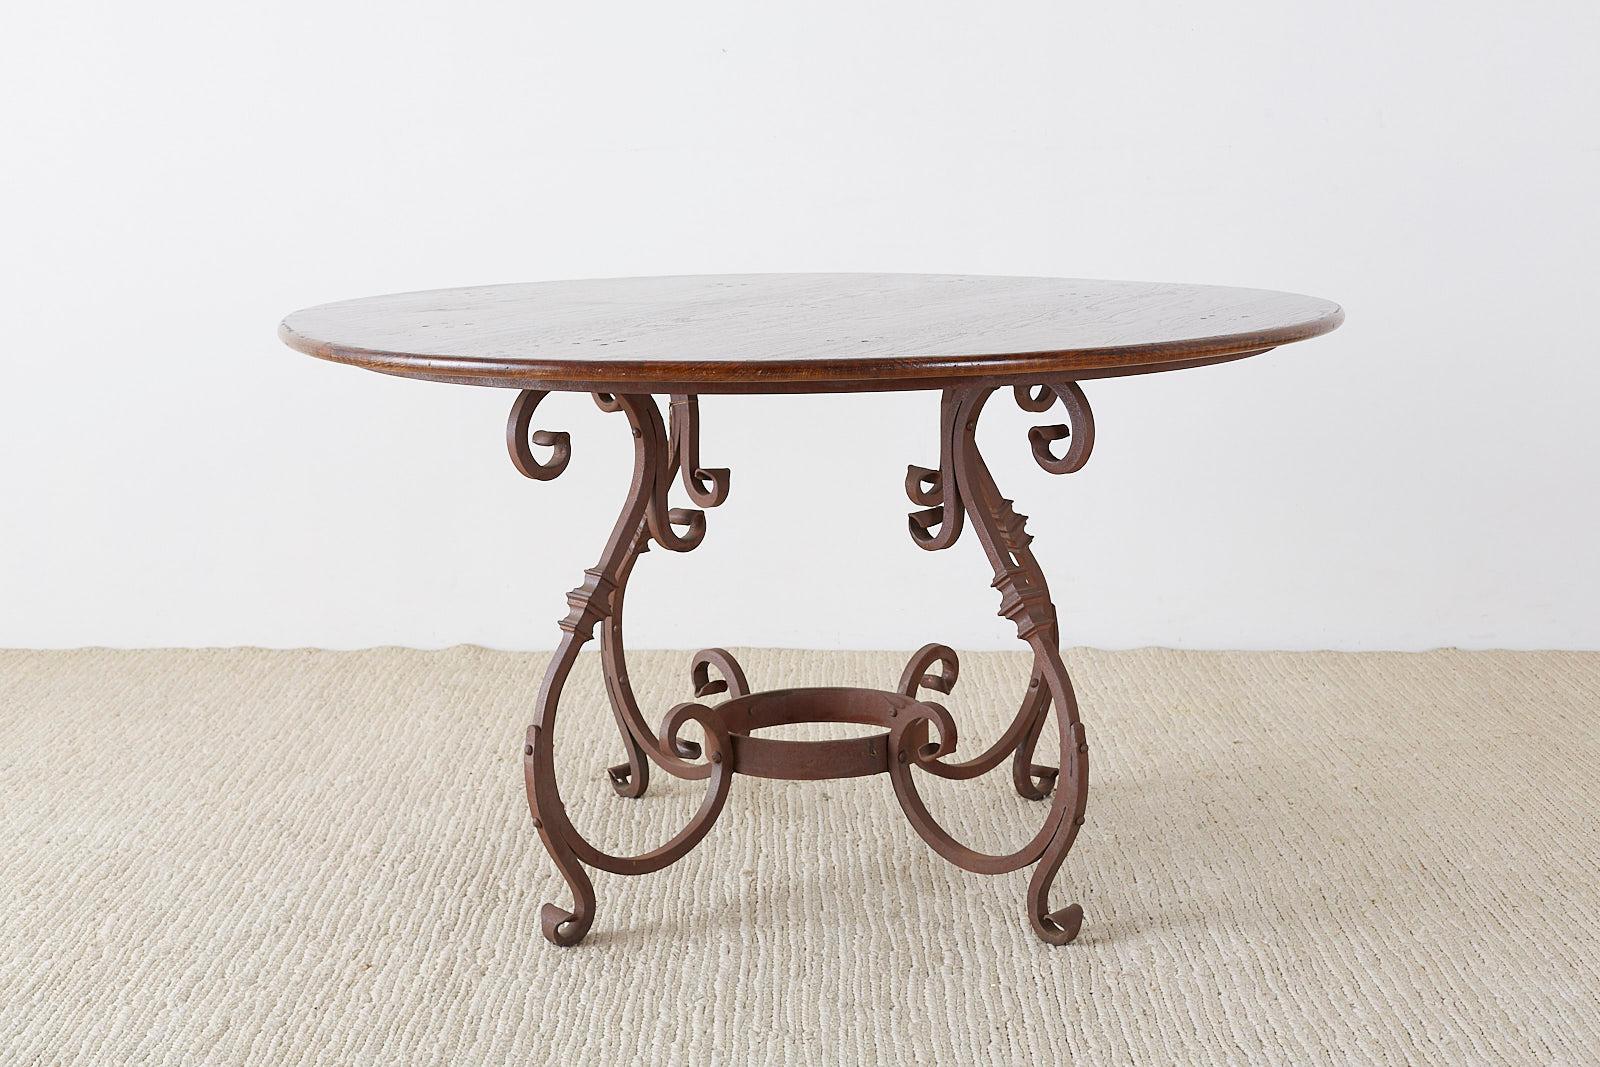 Hand-Crafted Italian Oak and Scrolled Iron Round Dining Table